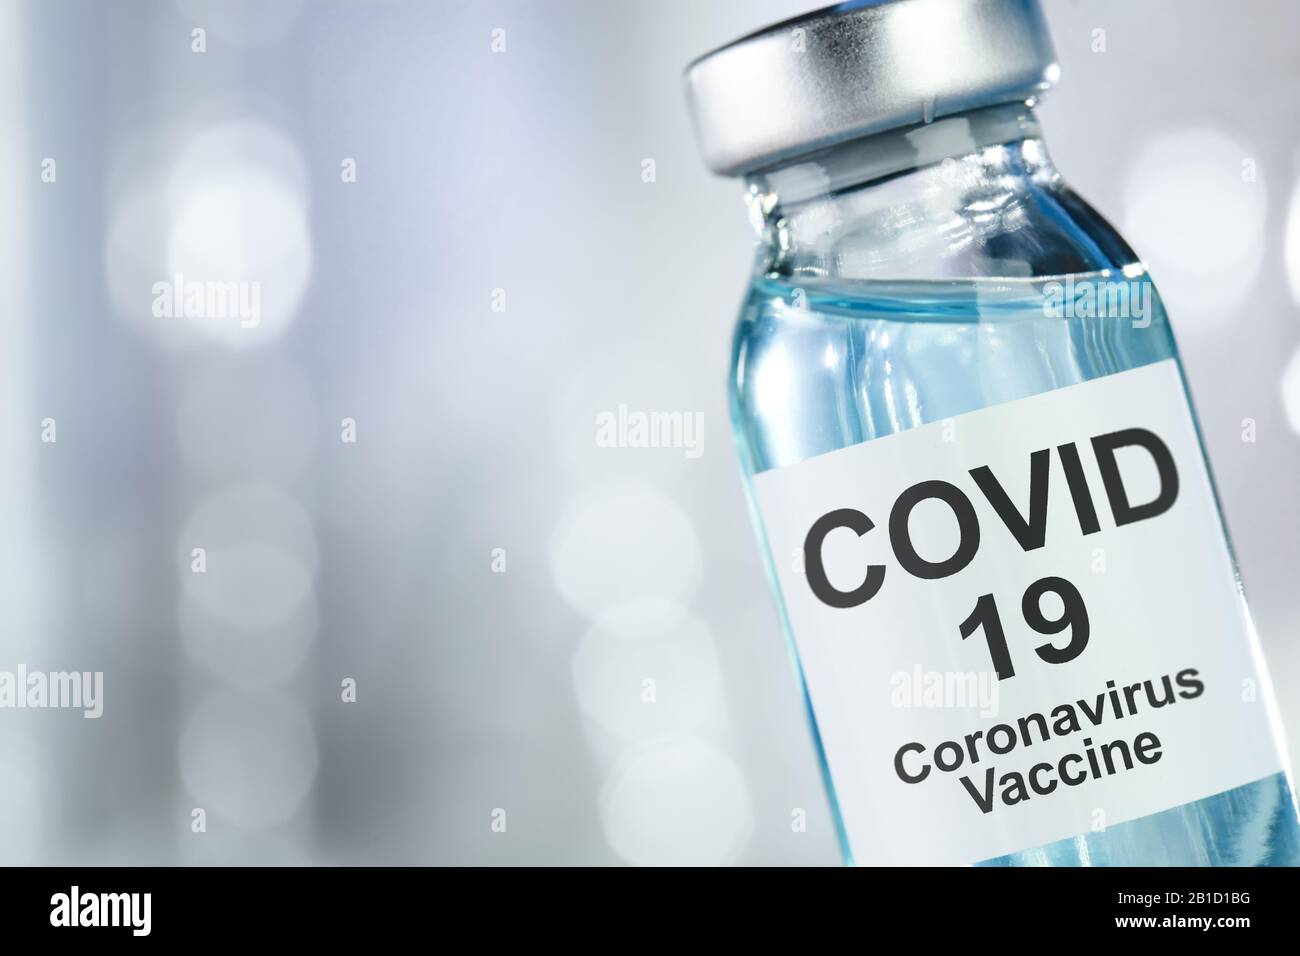 Healthcare cure concept with vaccine vial for Coronavirus, Covid 19 virus Stock Photo